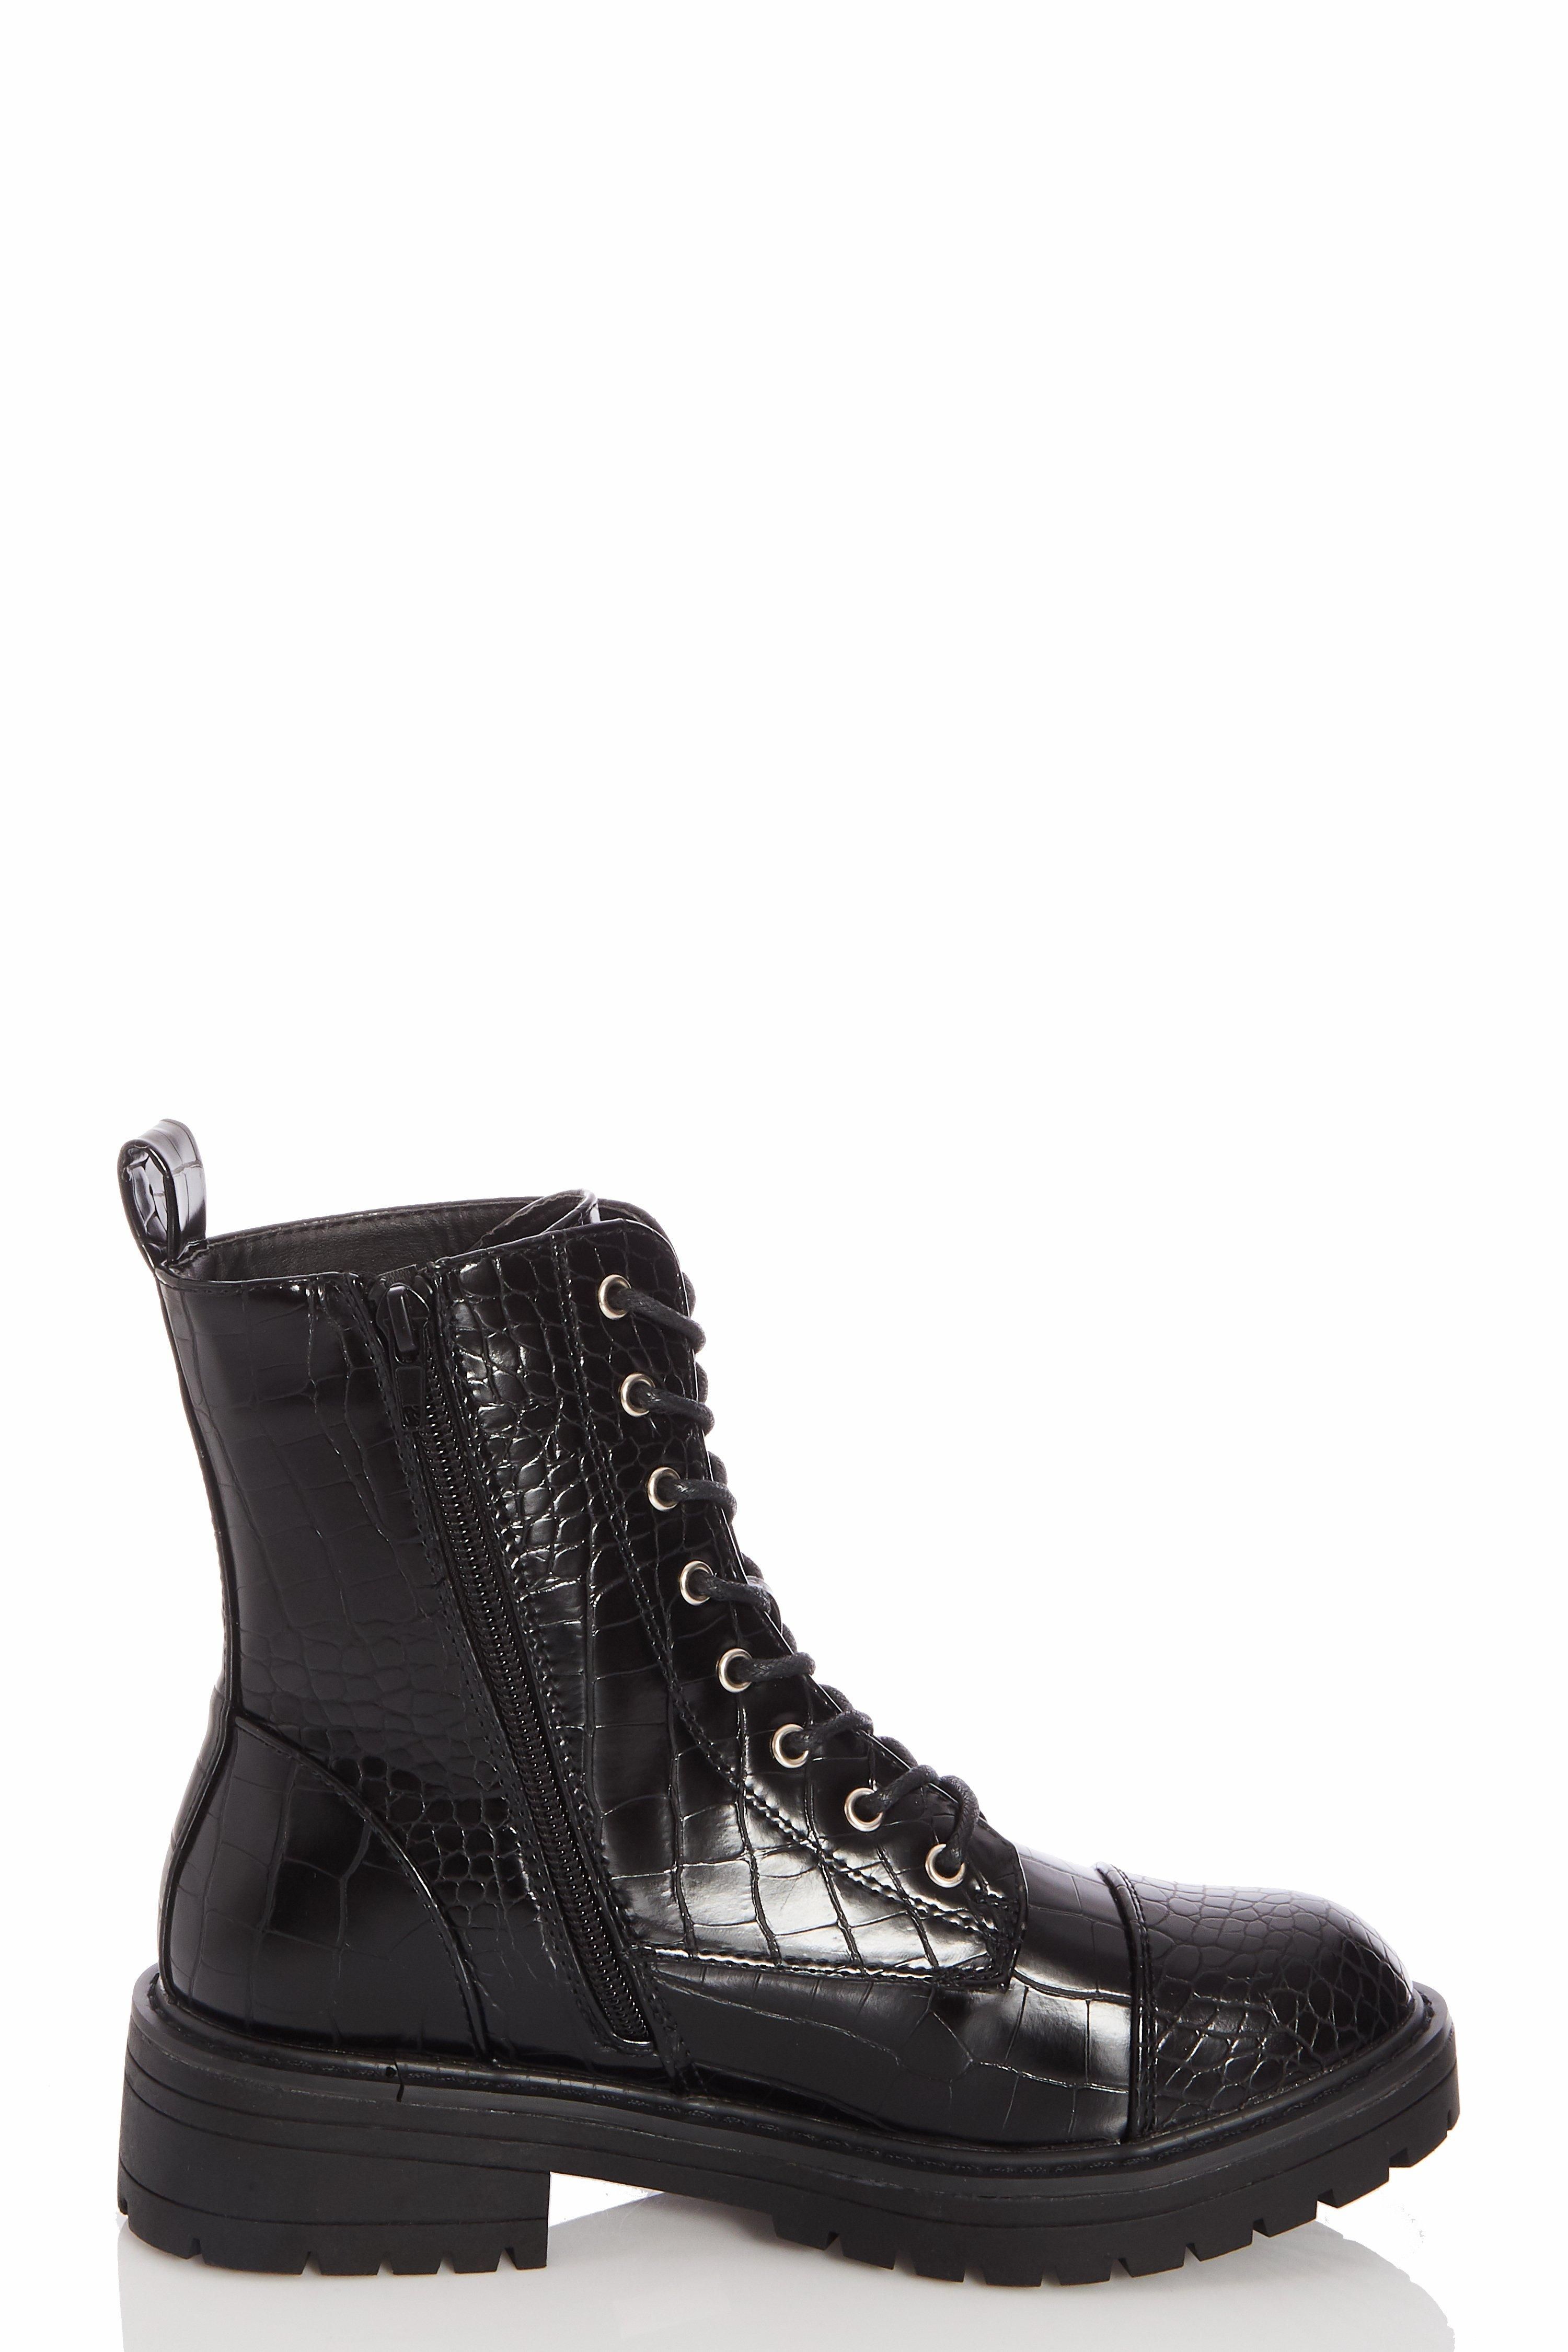 - Hiker style boots  - Crocodile effect  - Lace up detail  - Inner zip  - Heel height 2'' approx